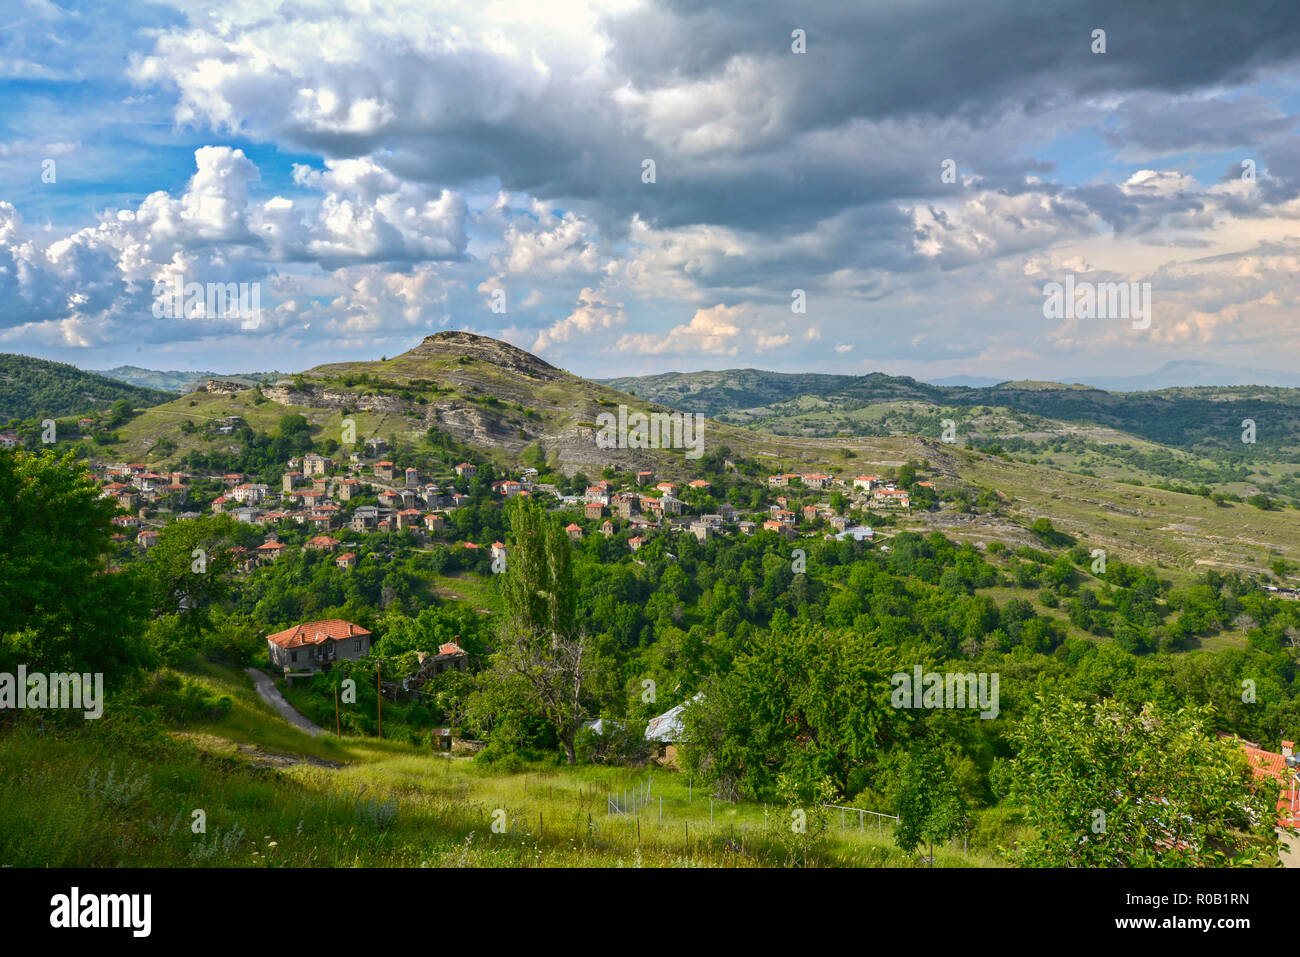 GRECE. Small villages like Pentalopos are typical for the remote mountain region of northern greece Stock Photo